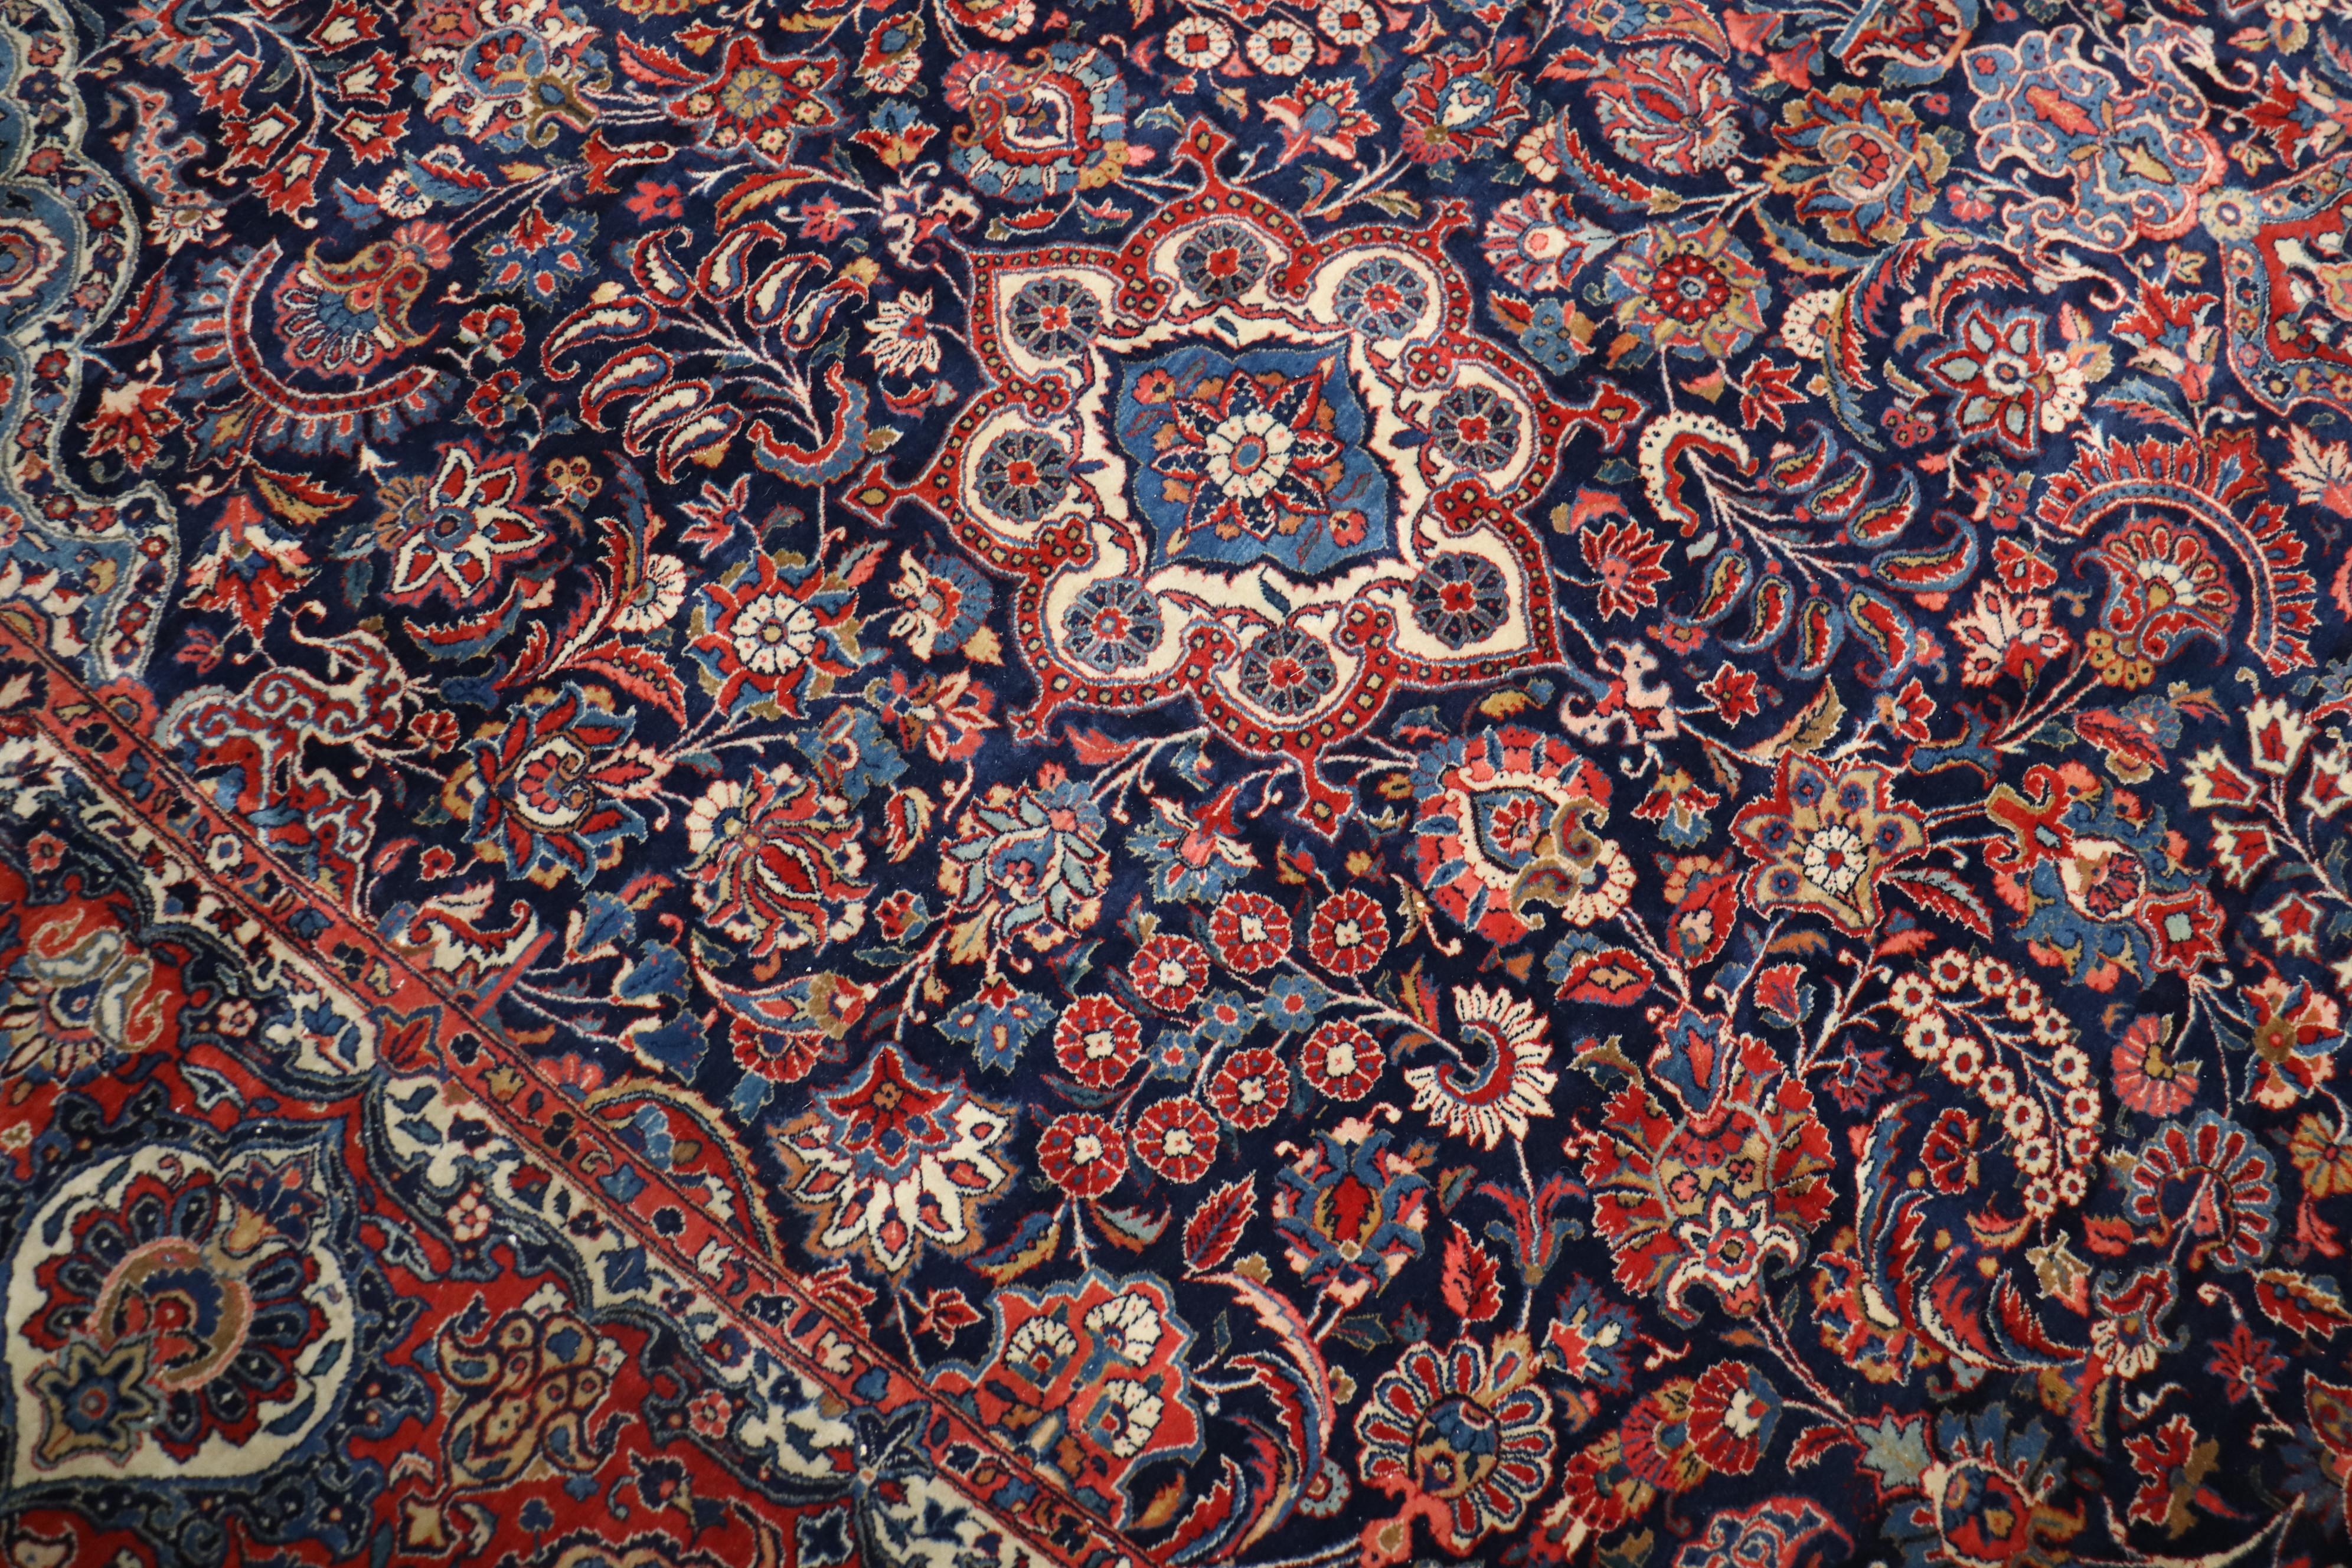 Beautiful Persian Kashan oversize rug from the second quarter of the 20th century. The previous owner must have kept this rug in phenomenal shape

Measures: 11'8” x 16'6”

The best 19th century and turn-of-the-20th century Kashan carpets, be